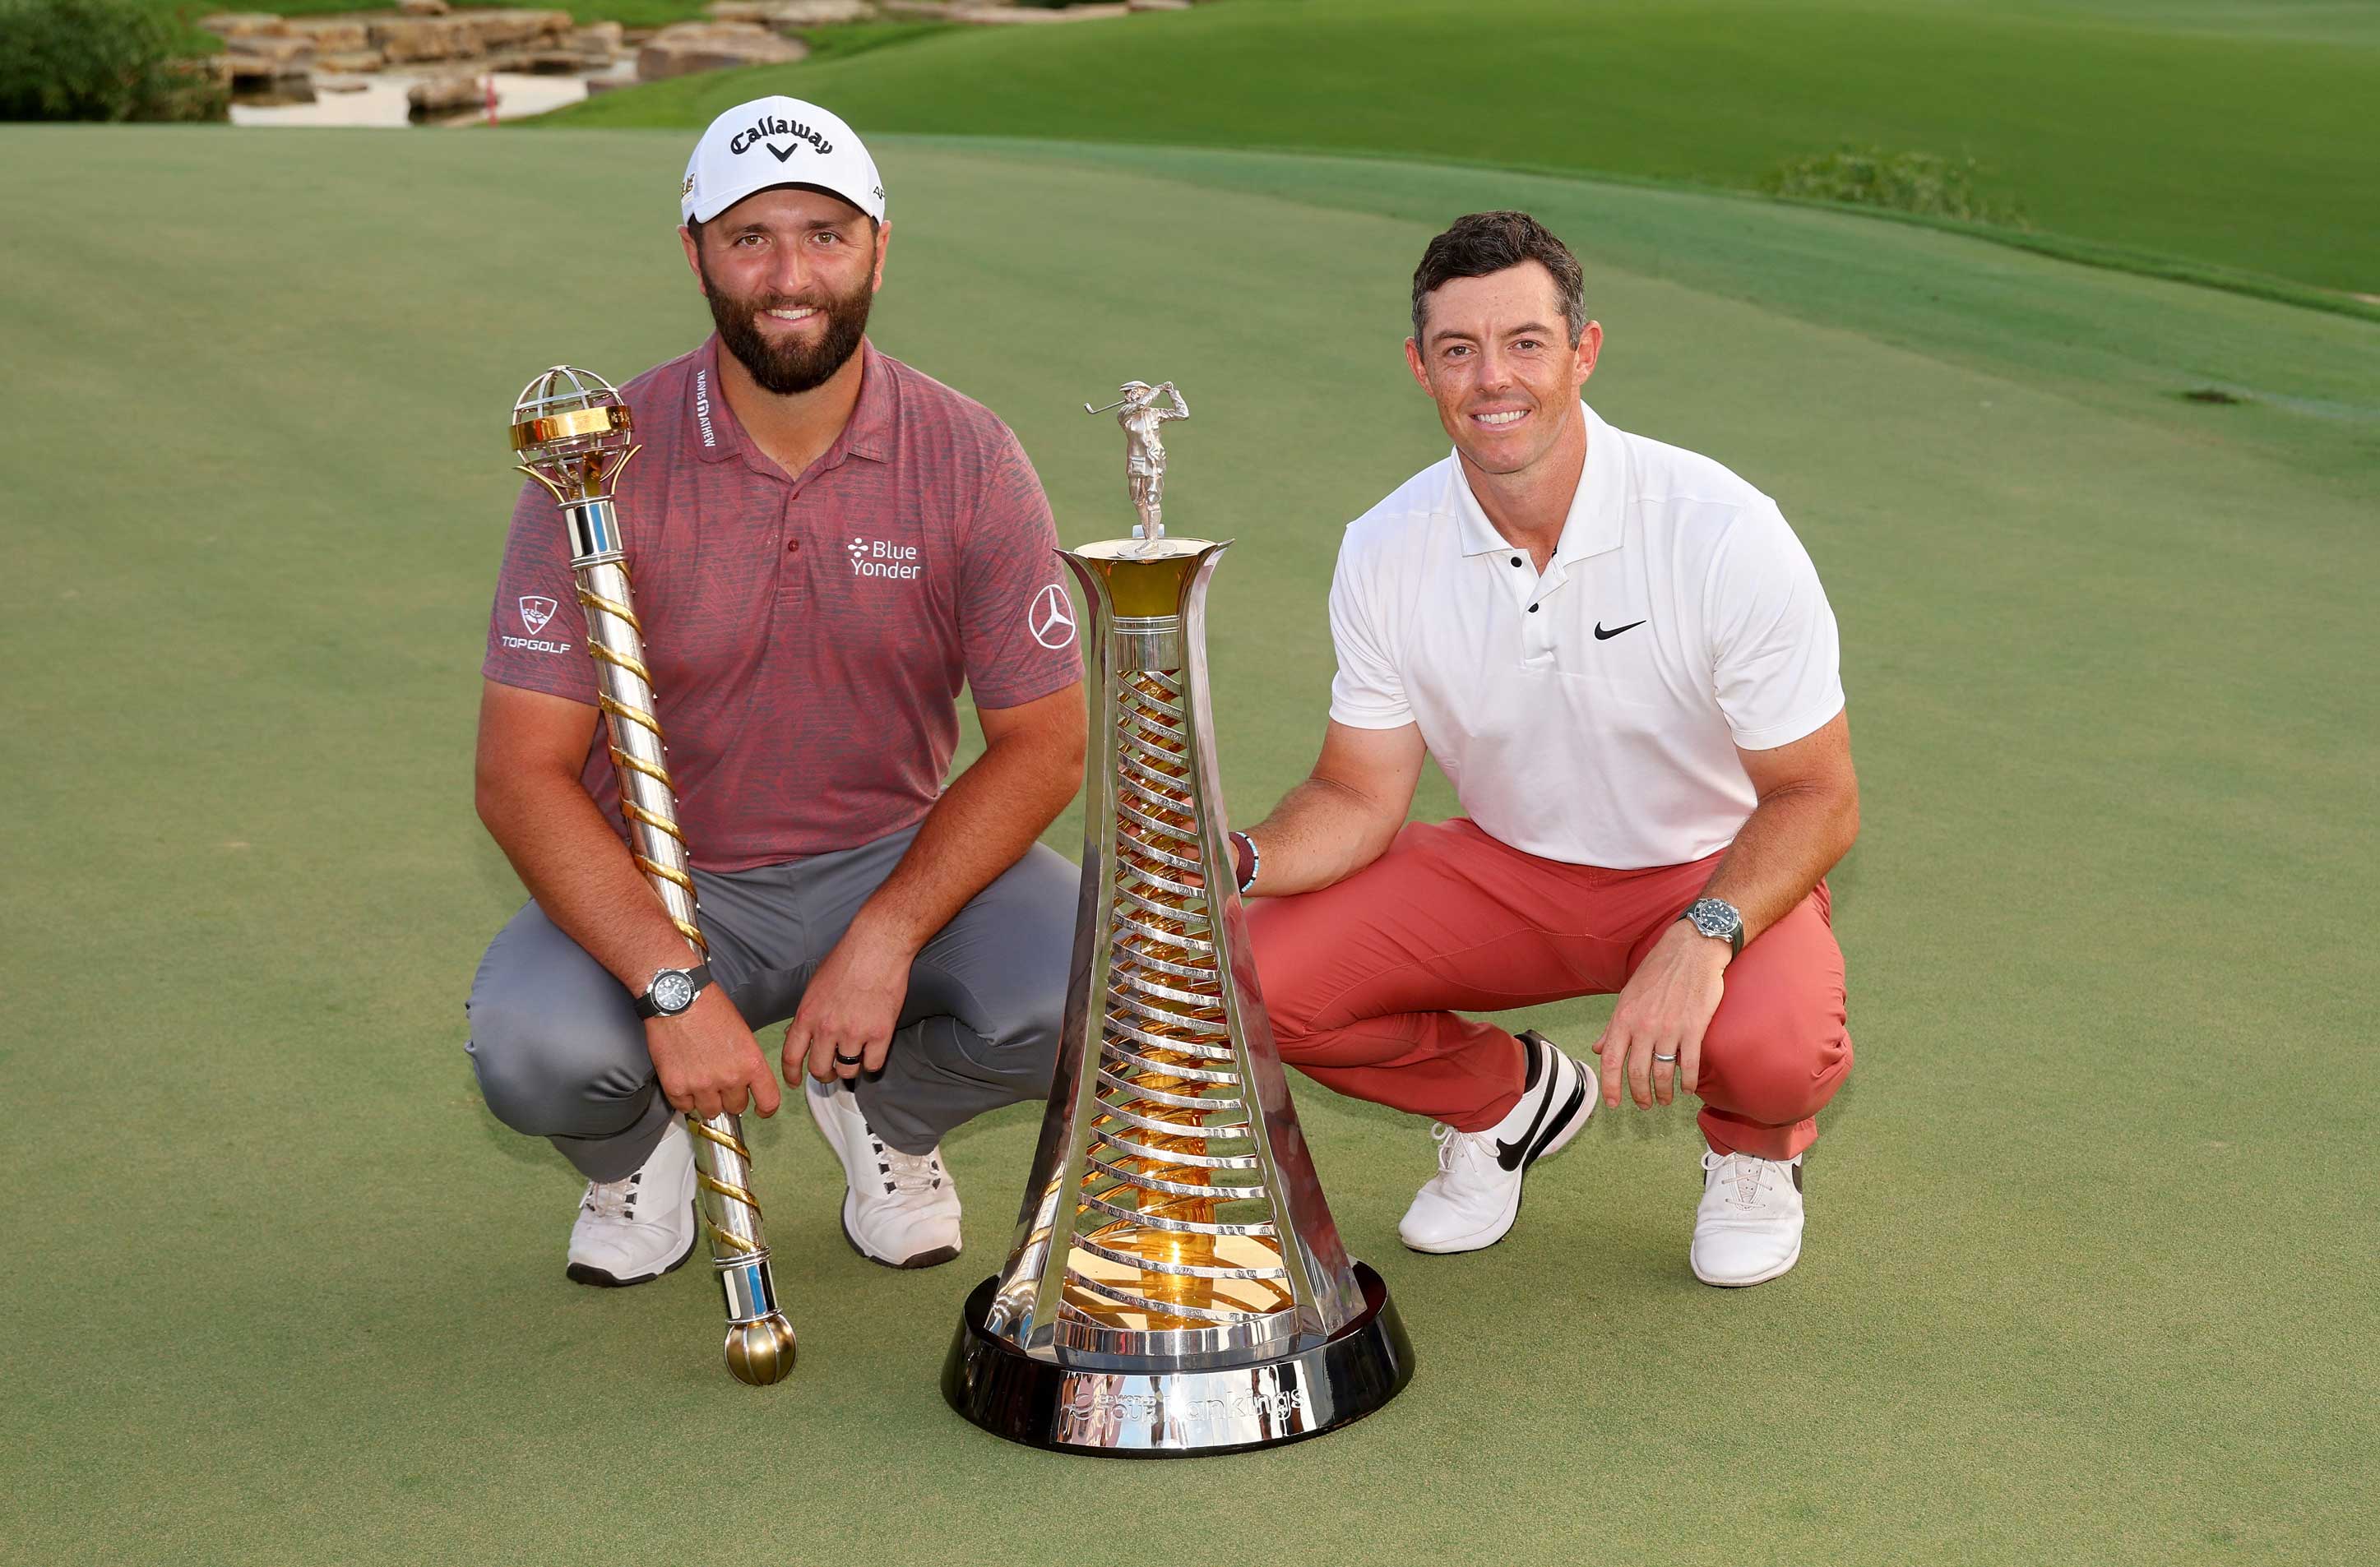 Here's the prize money payout for each golfer at the 2022 DP World Tour  Championship, Golf News and Tour Information